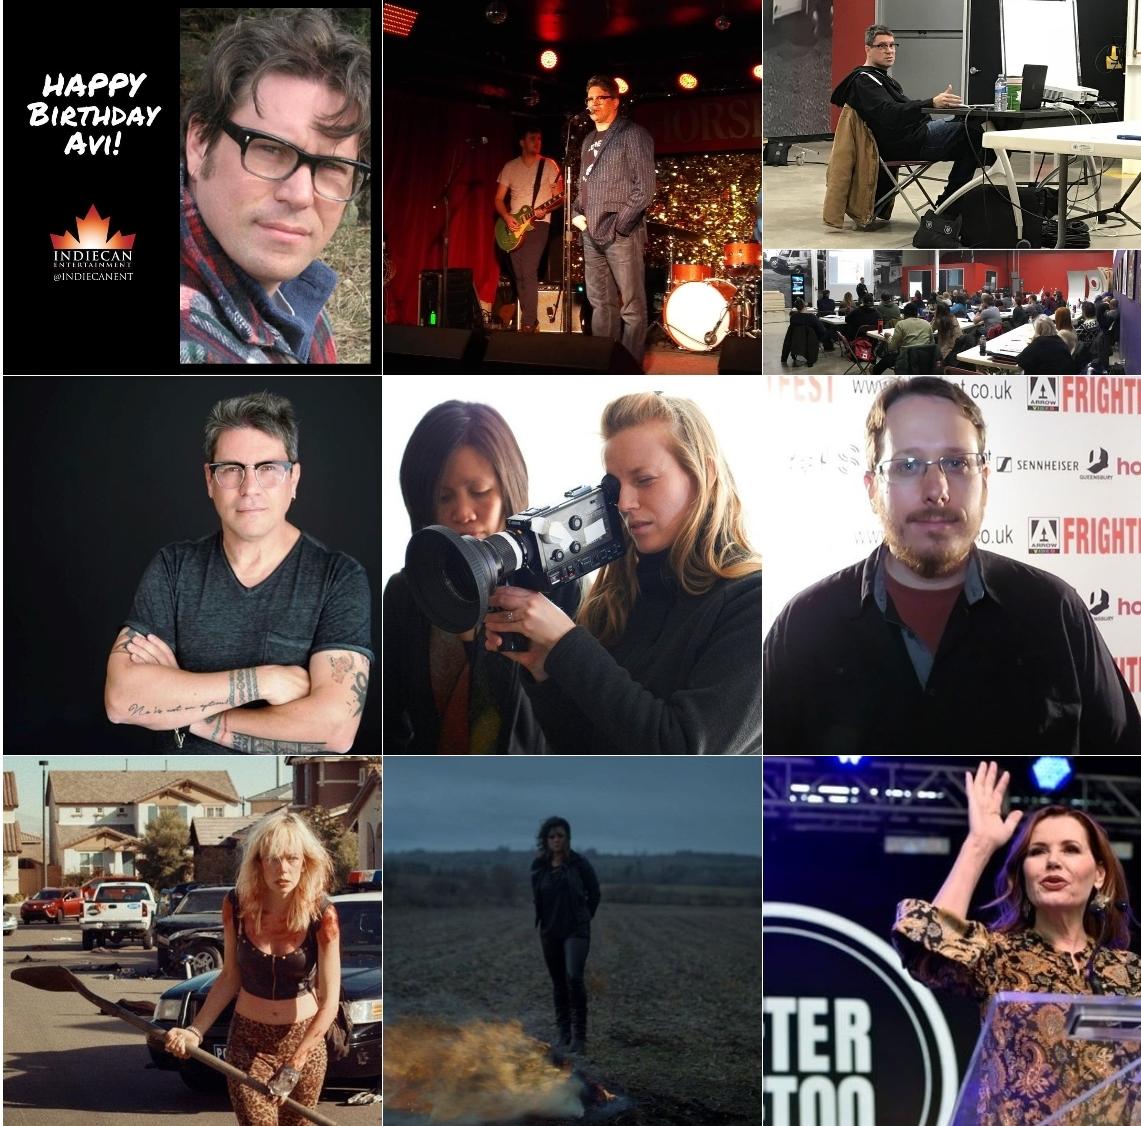 From numerous releases from just about all genres, to @avifedergreen's producing seminars, and of course #TIFF2018, we couldn't be more proud of 2018! Here's to an even stronger 2019!